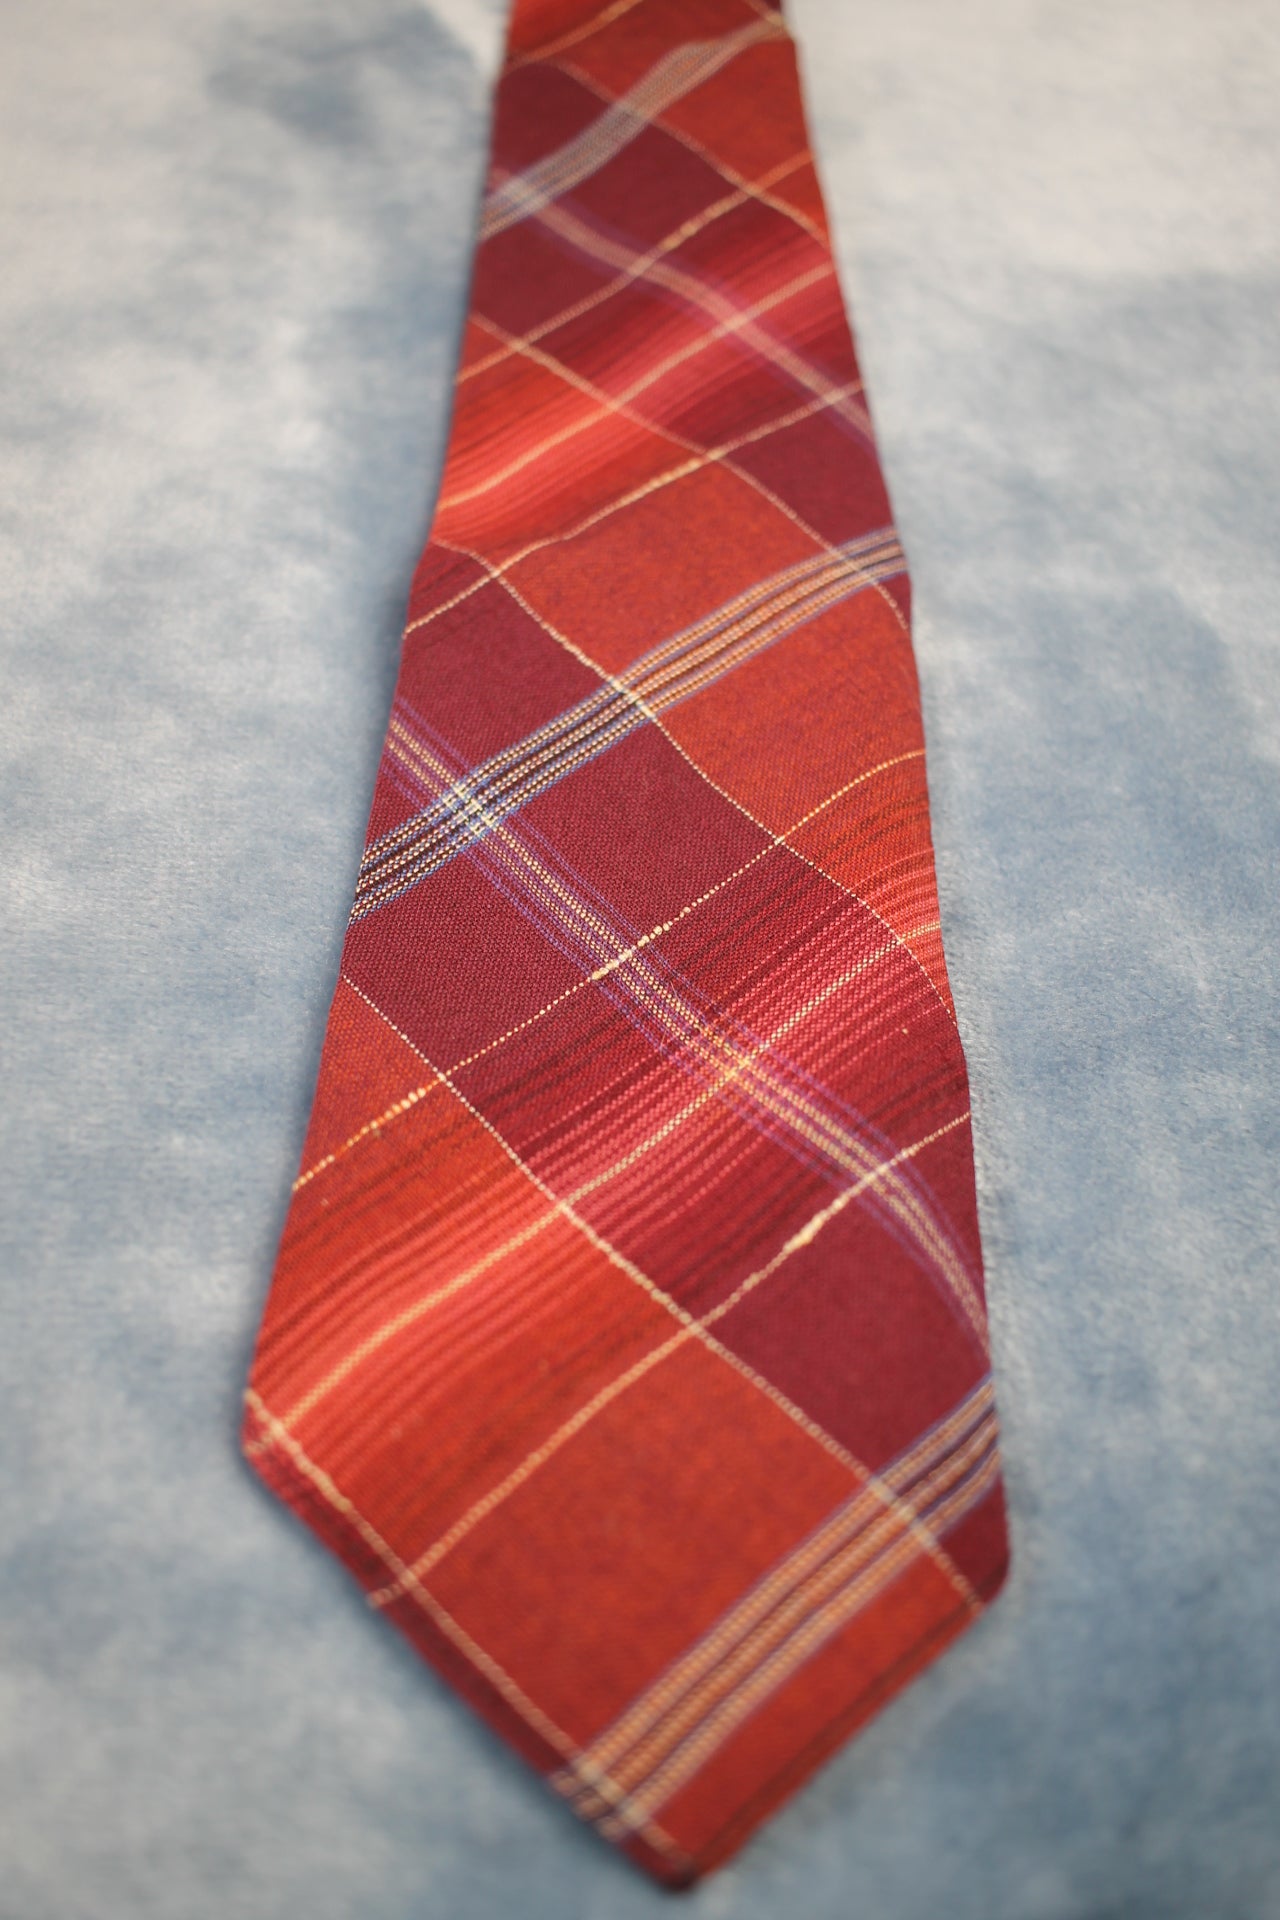 Vintage hand tailored 1940s/50s red purple check swing tie